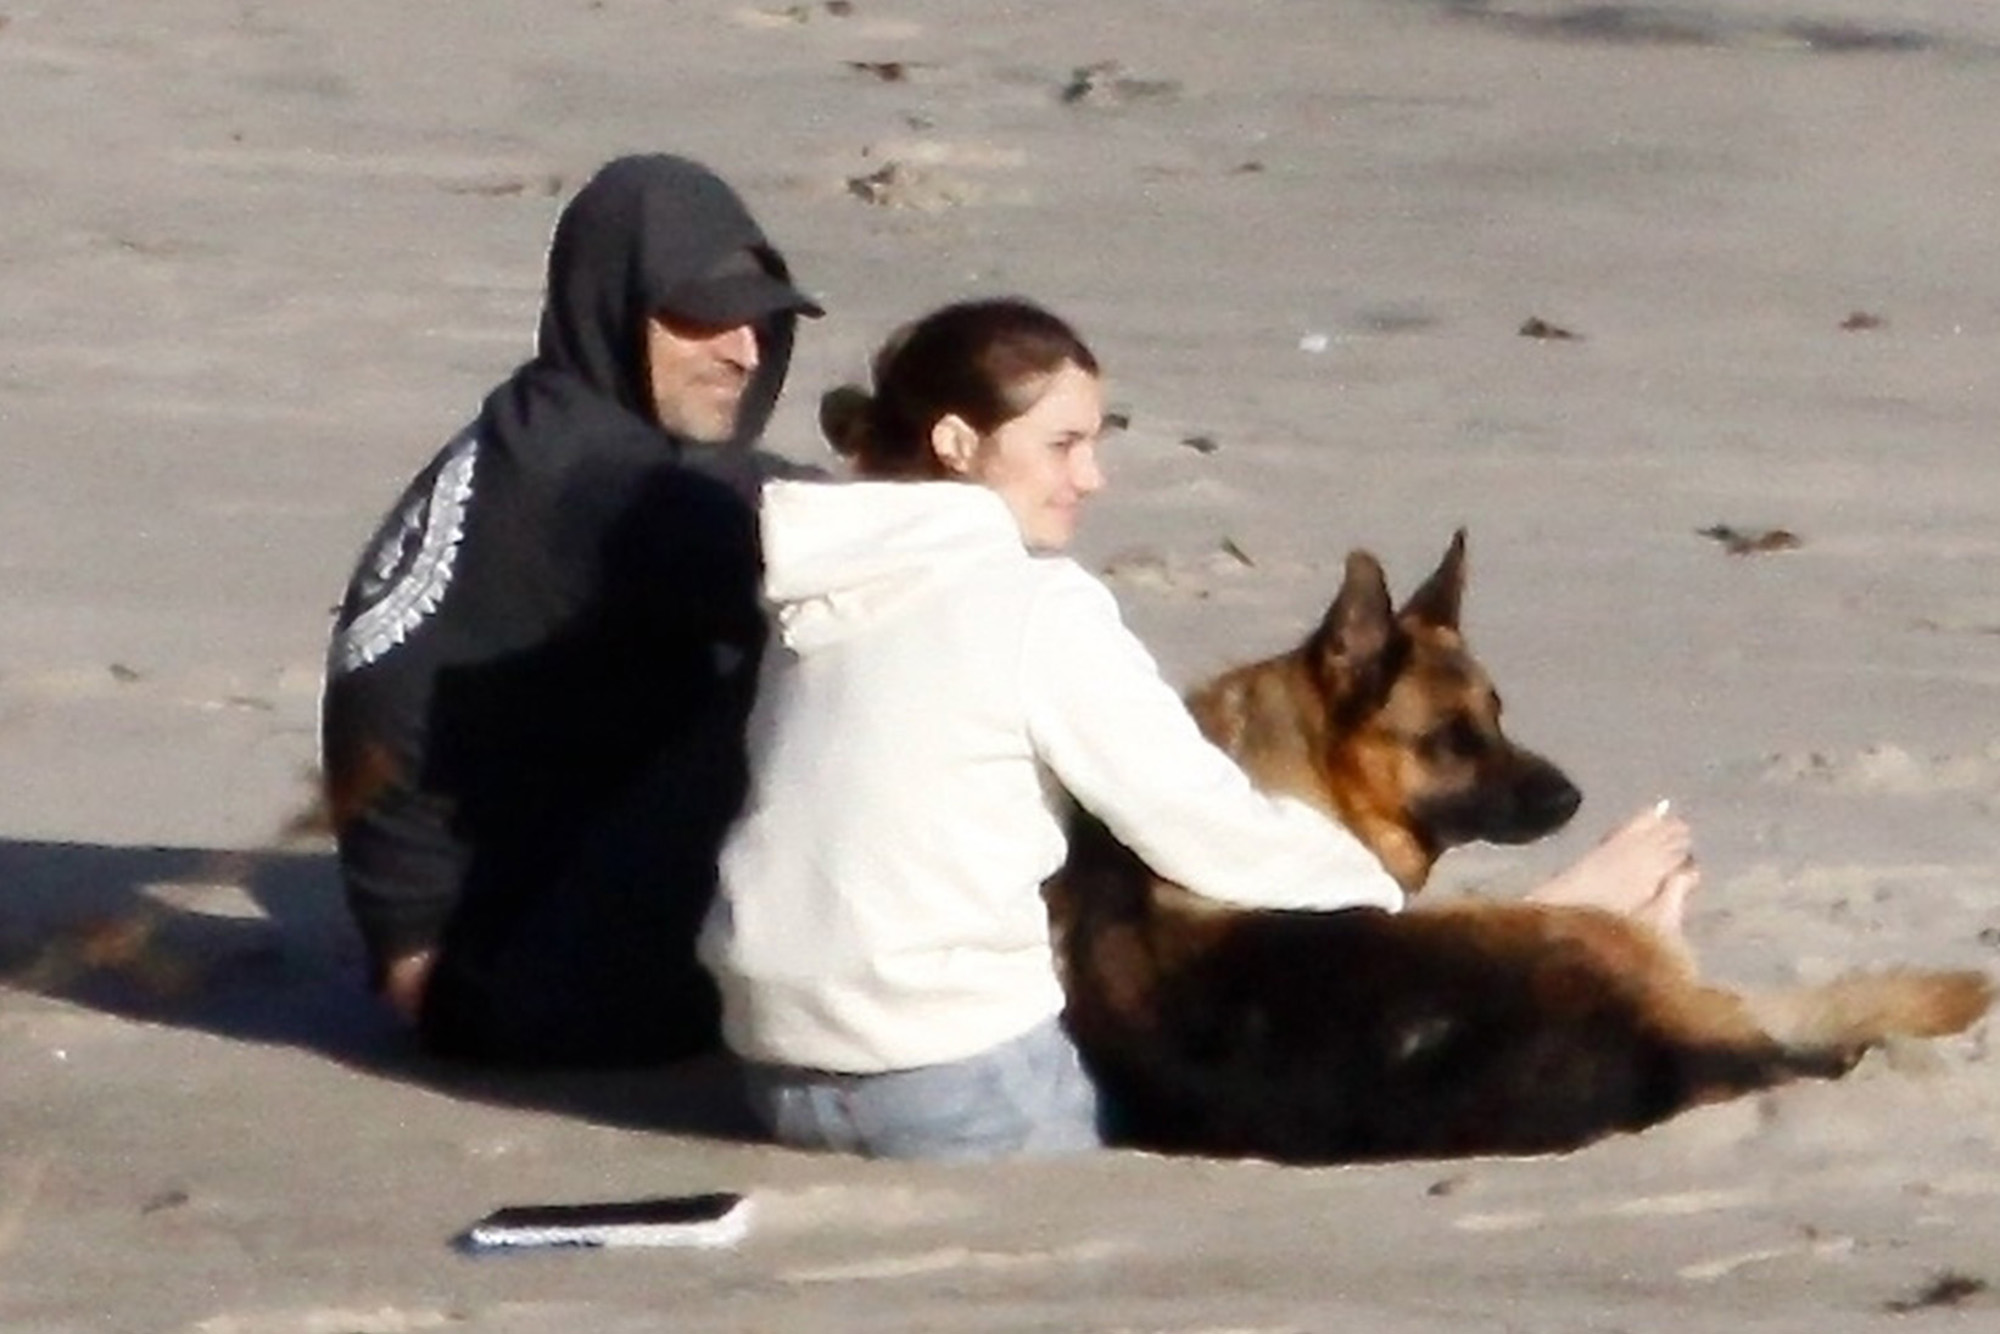 Aaron Rodgers and Shailene Woodley at the beach in April 2021